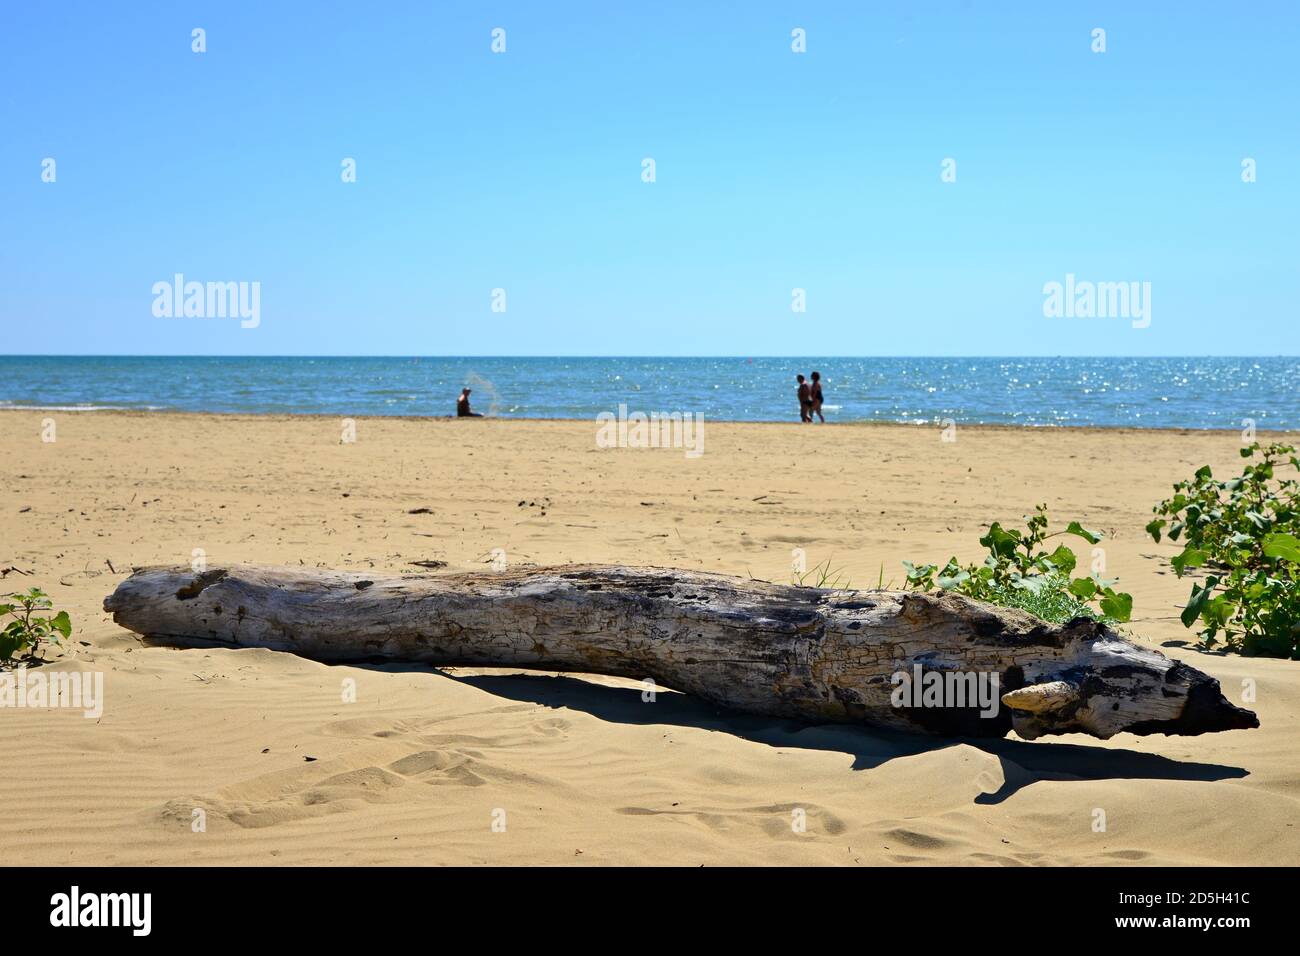 Romantic view of natural beach. Old wooden trunk on a golden beach. Driftwood on a romantic Italian beach. Romantic background with people on the beac Stock Photo